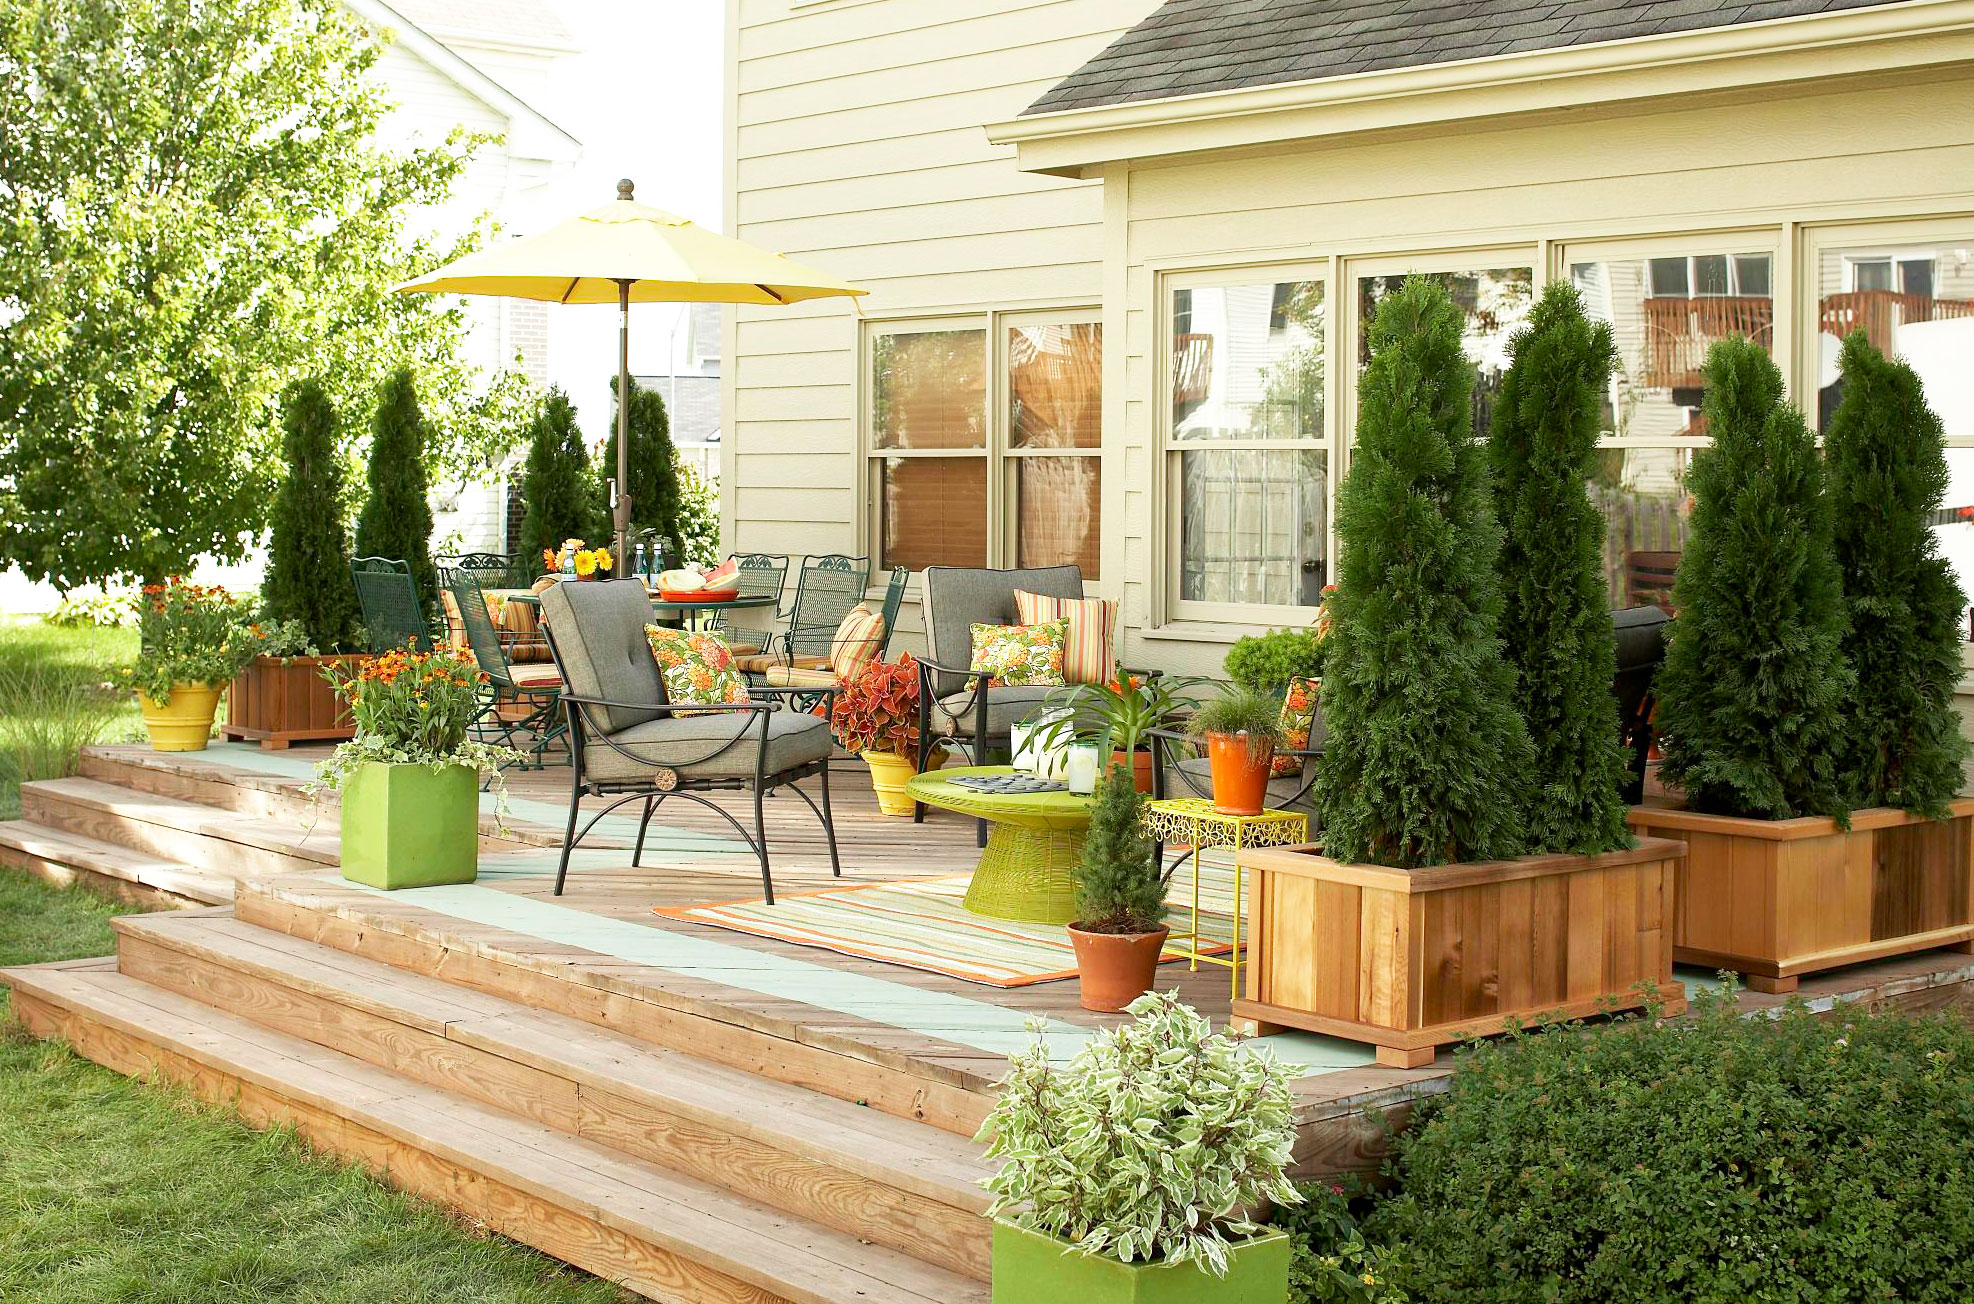 How to Decorate a Deck With Plants